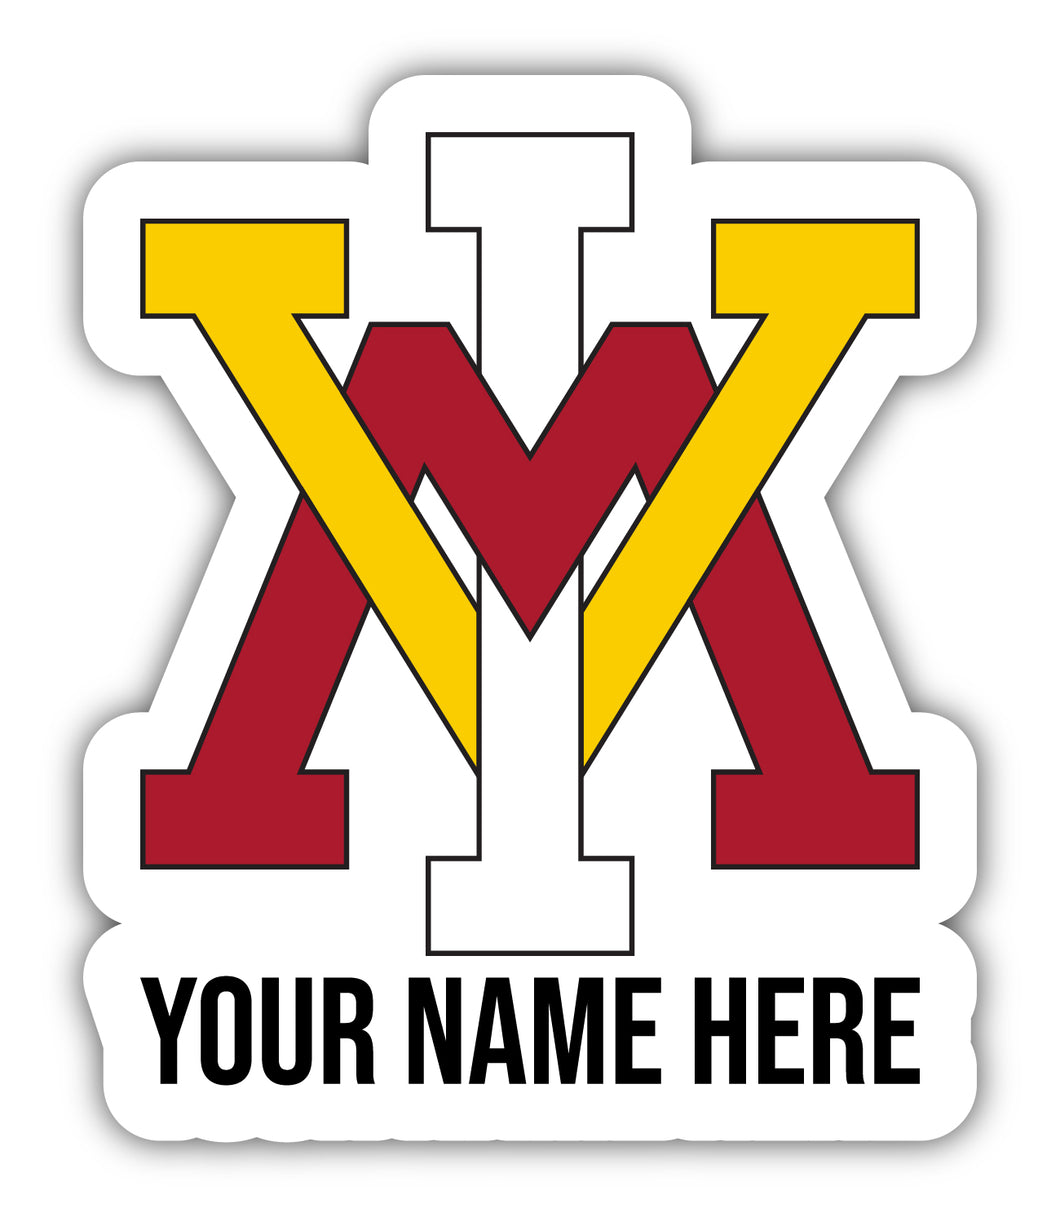 VMI Keydets 9x14-Inch Mascot Logo NCAA Custom Name Vinyl Sticker - Personalize with Name